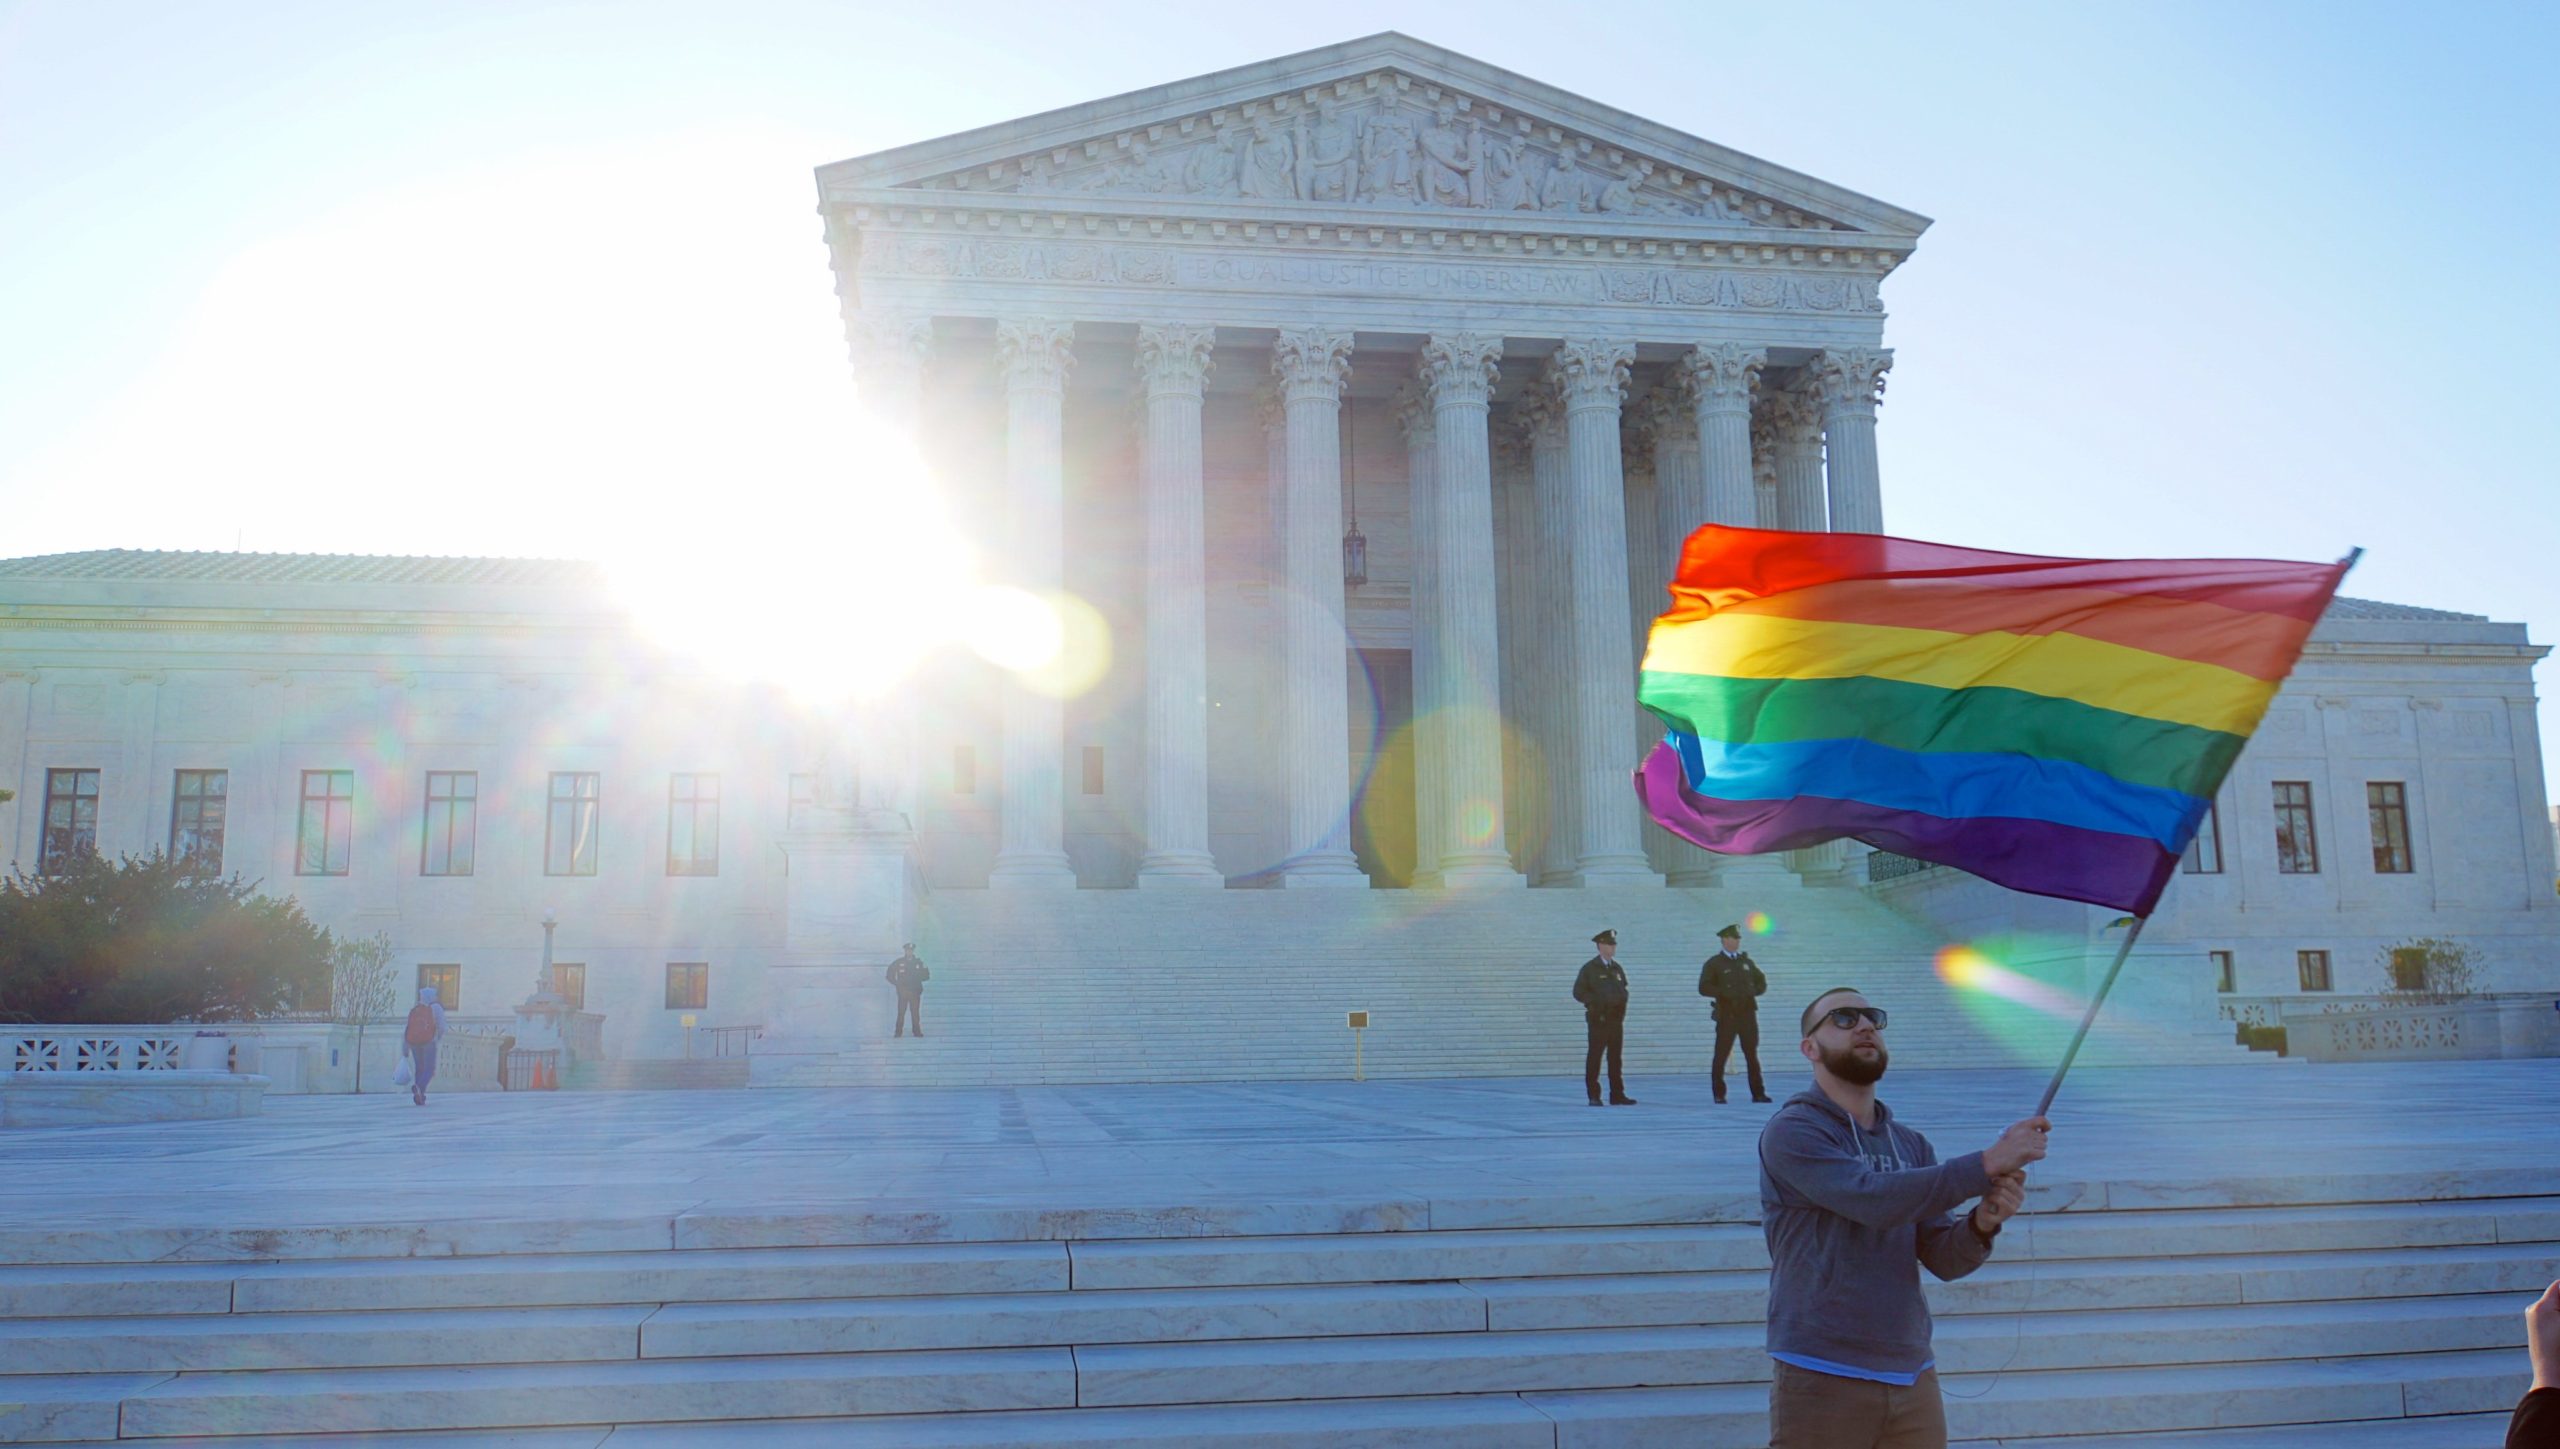 LGBTQ+ flag being waved in front of the U.S. Supreme Court.